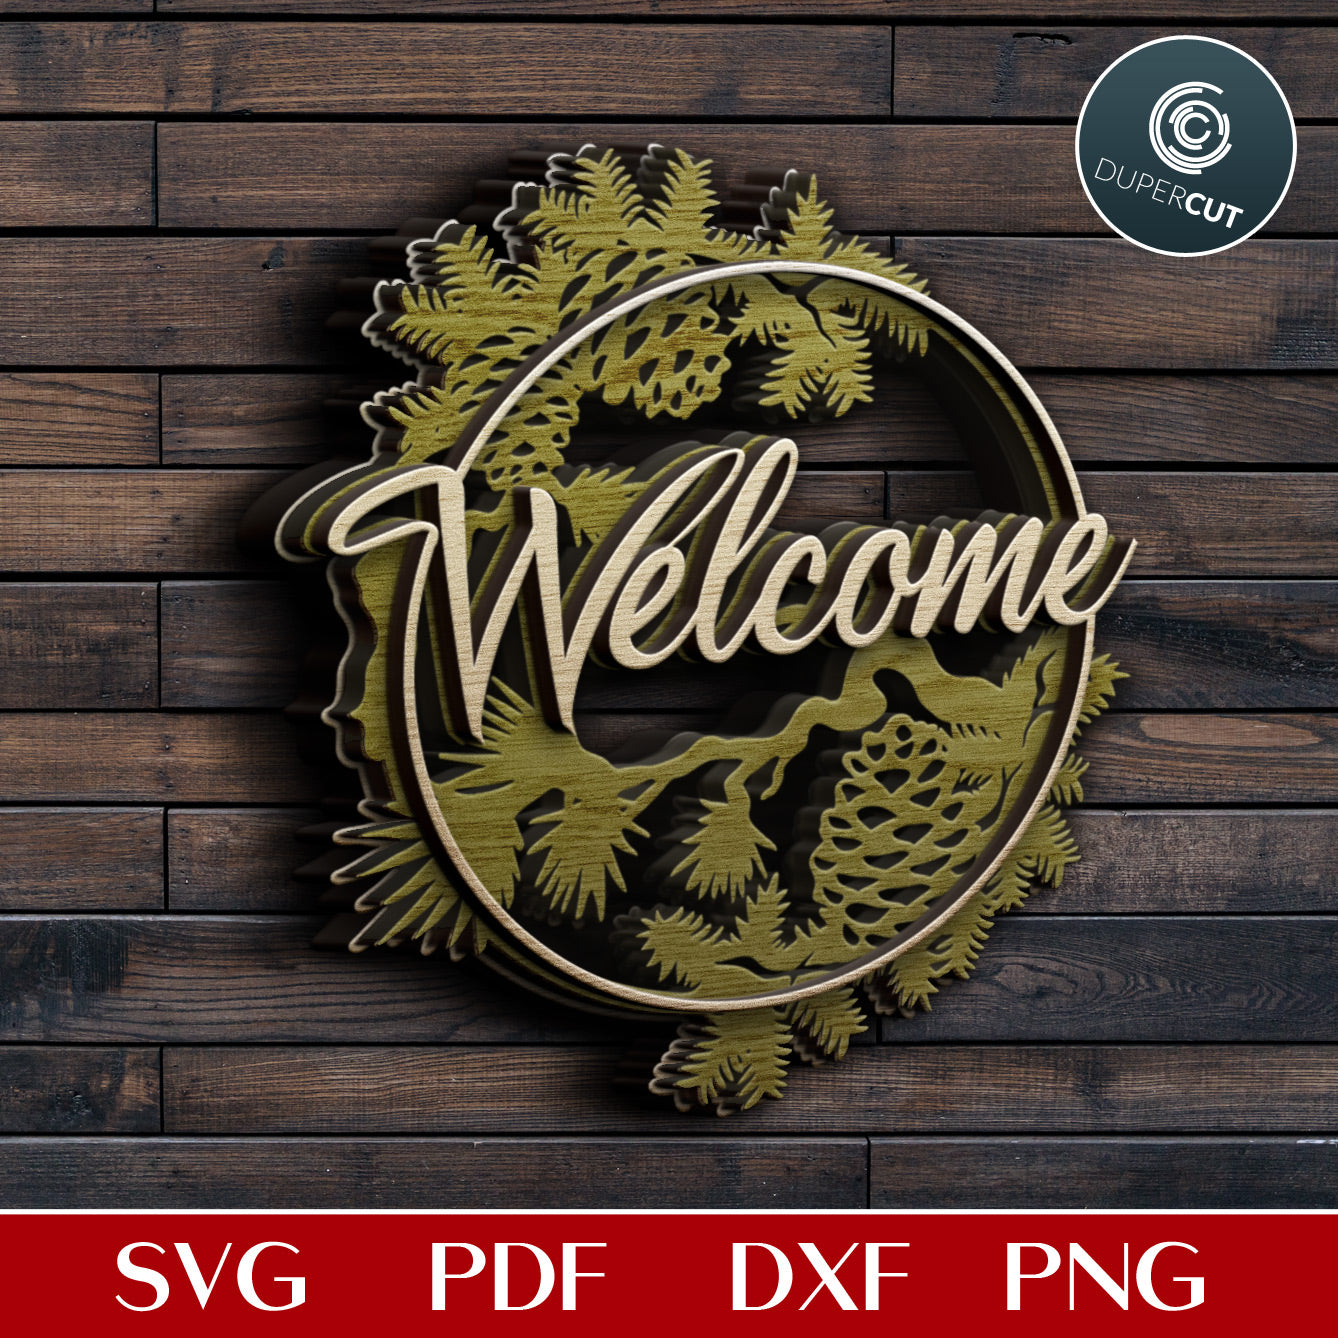 Pinecone welcome sign - layered laser cutting files SVG PDF DXF vector template for Glowforge, Cricut, Silhouette Cameo, CNC plasma machines